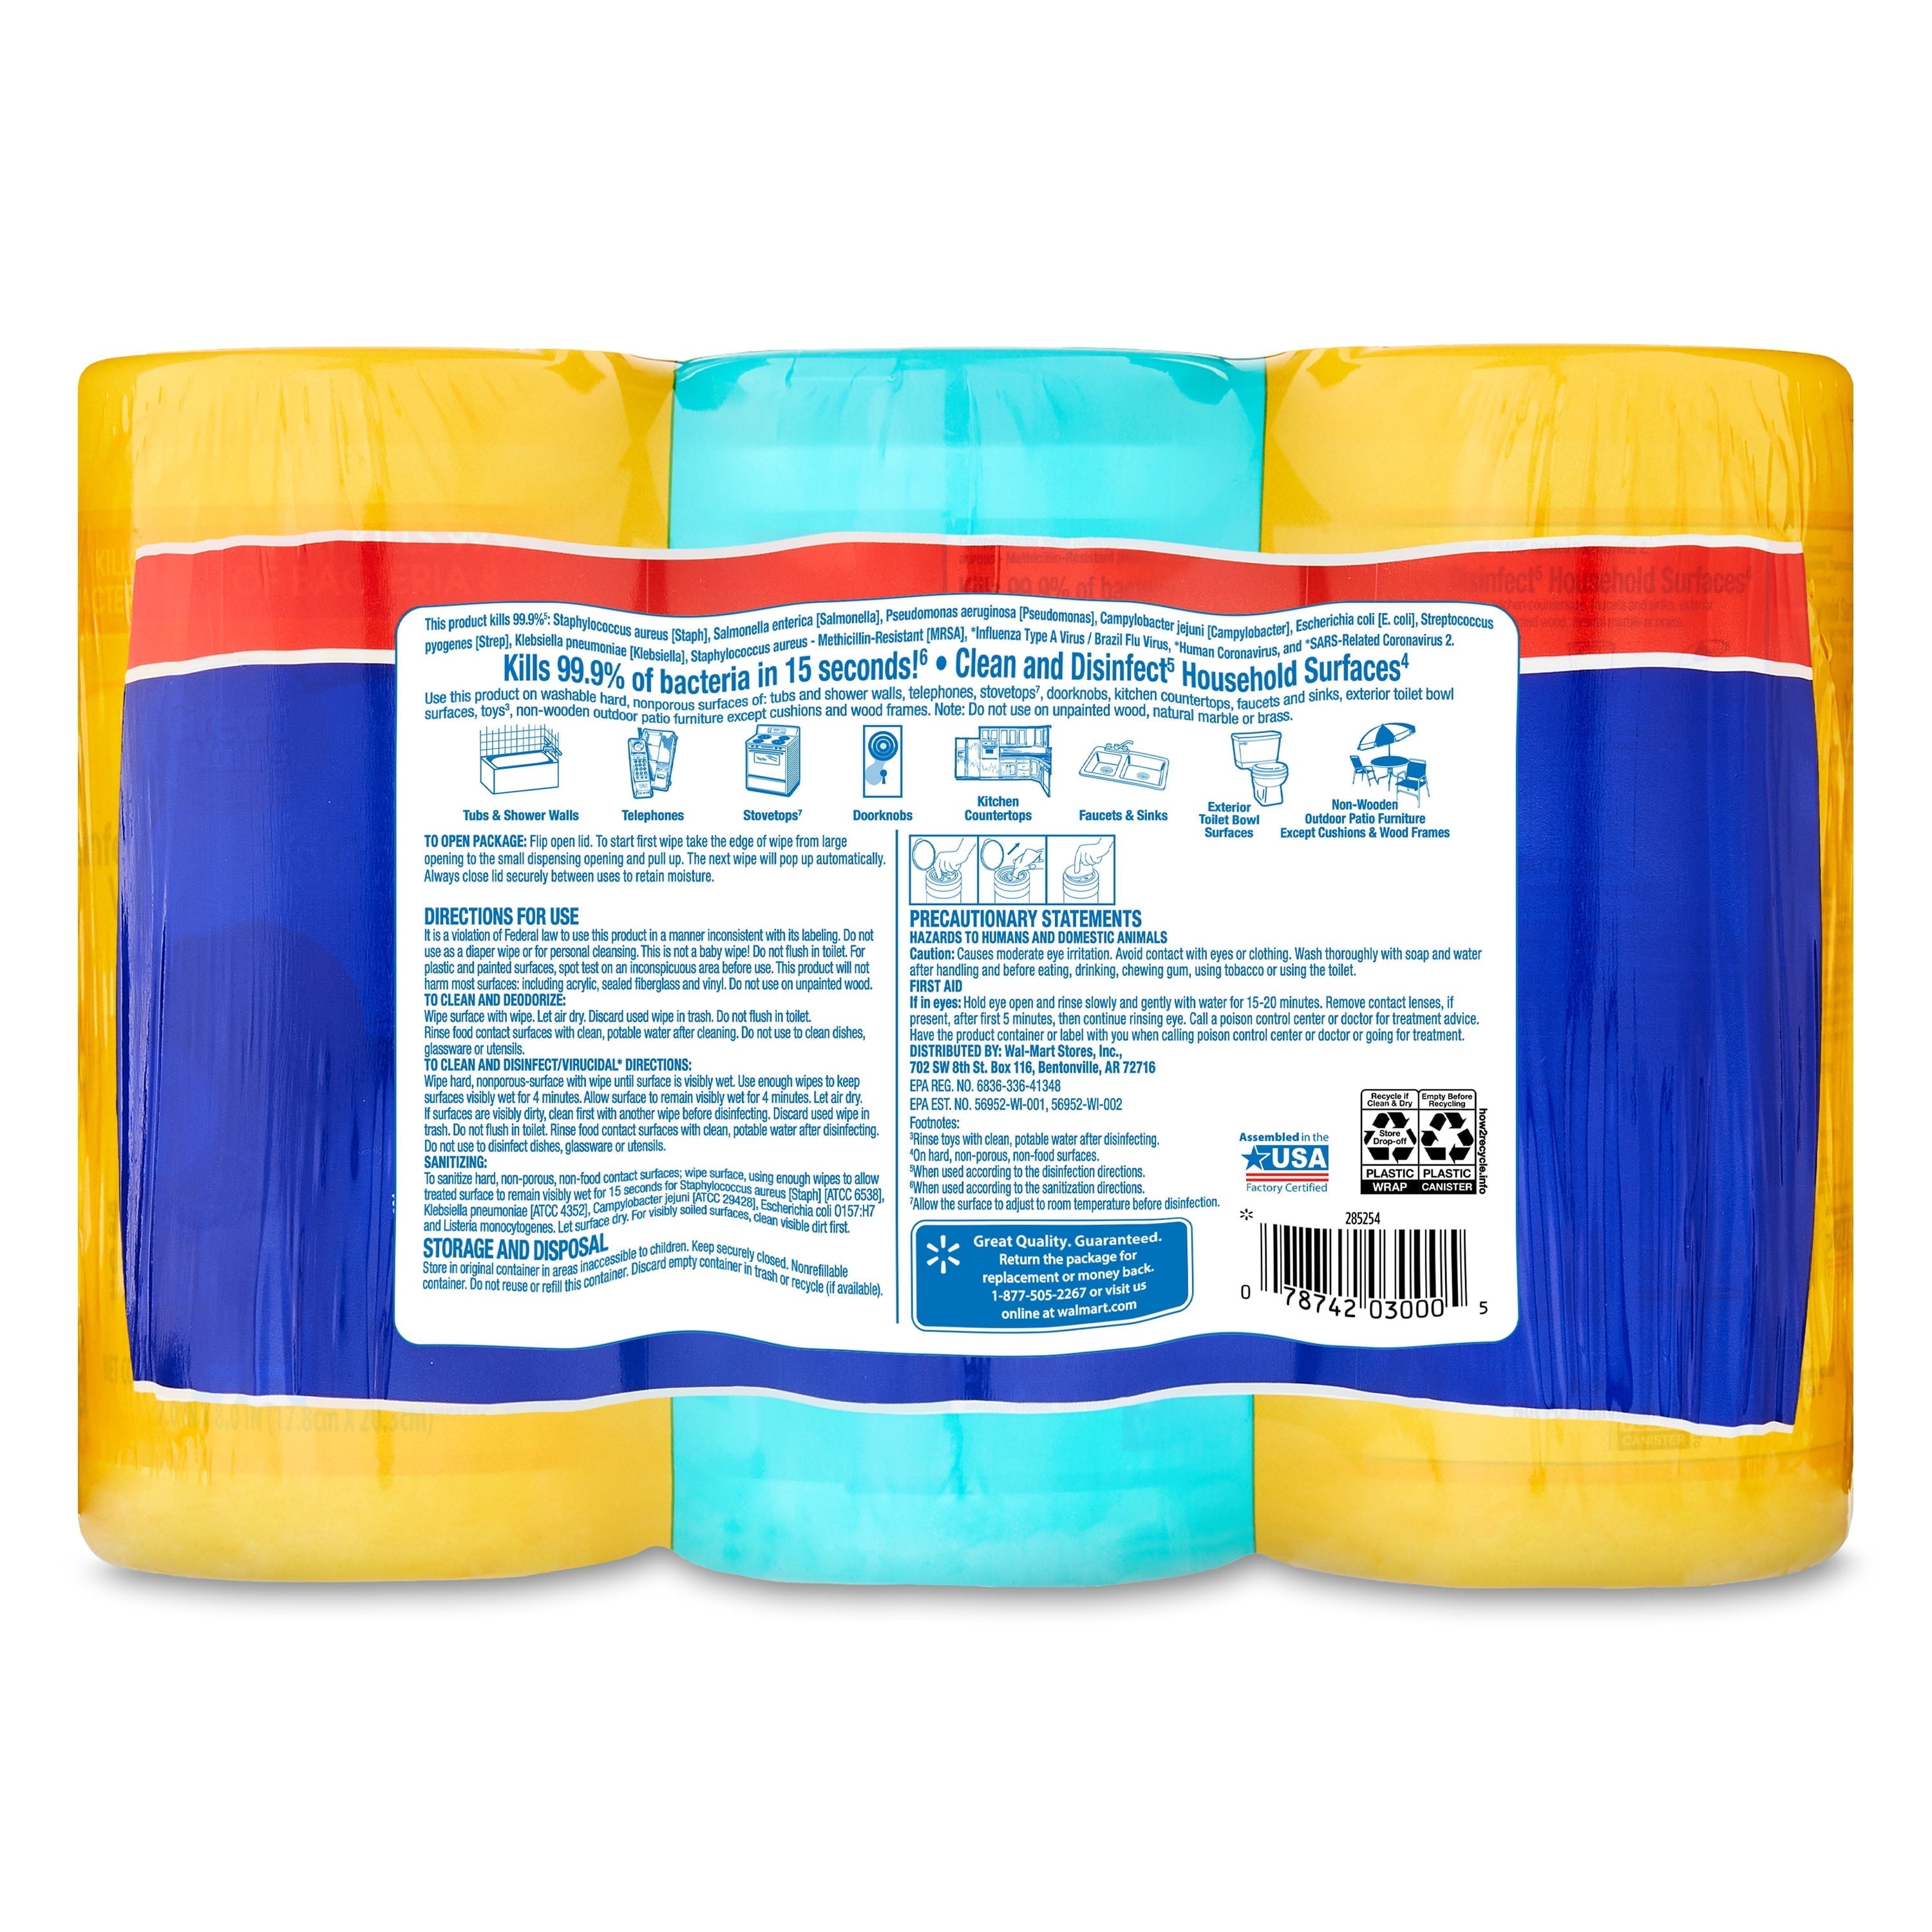 Wholesale prices with free shipping all over United States Great Value Disinfecting Wipes, Fresh and Lemon Scent, 225 Wipes - Steven Deals